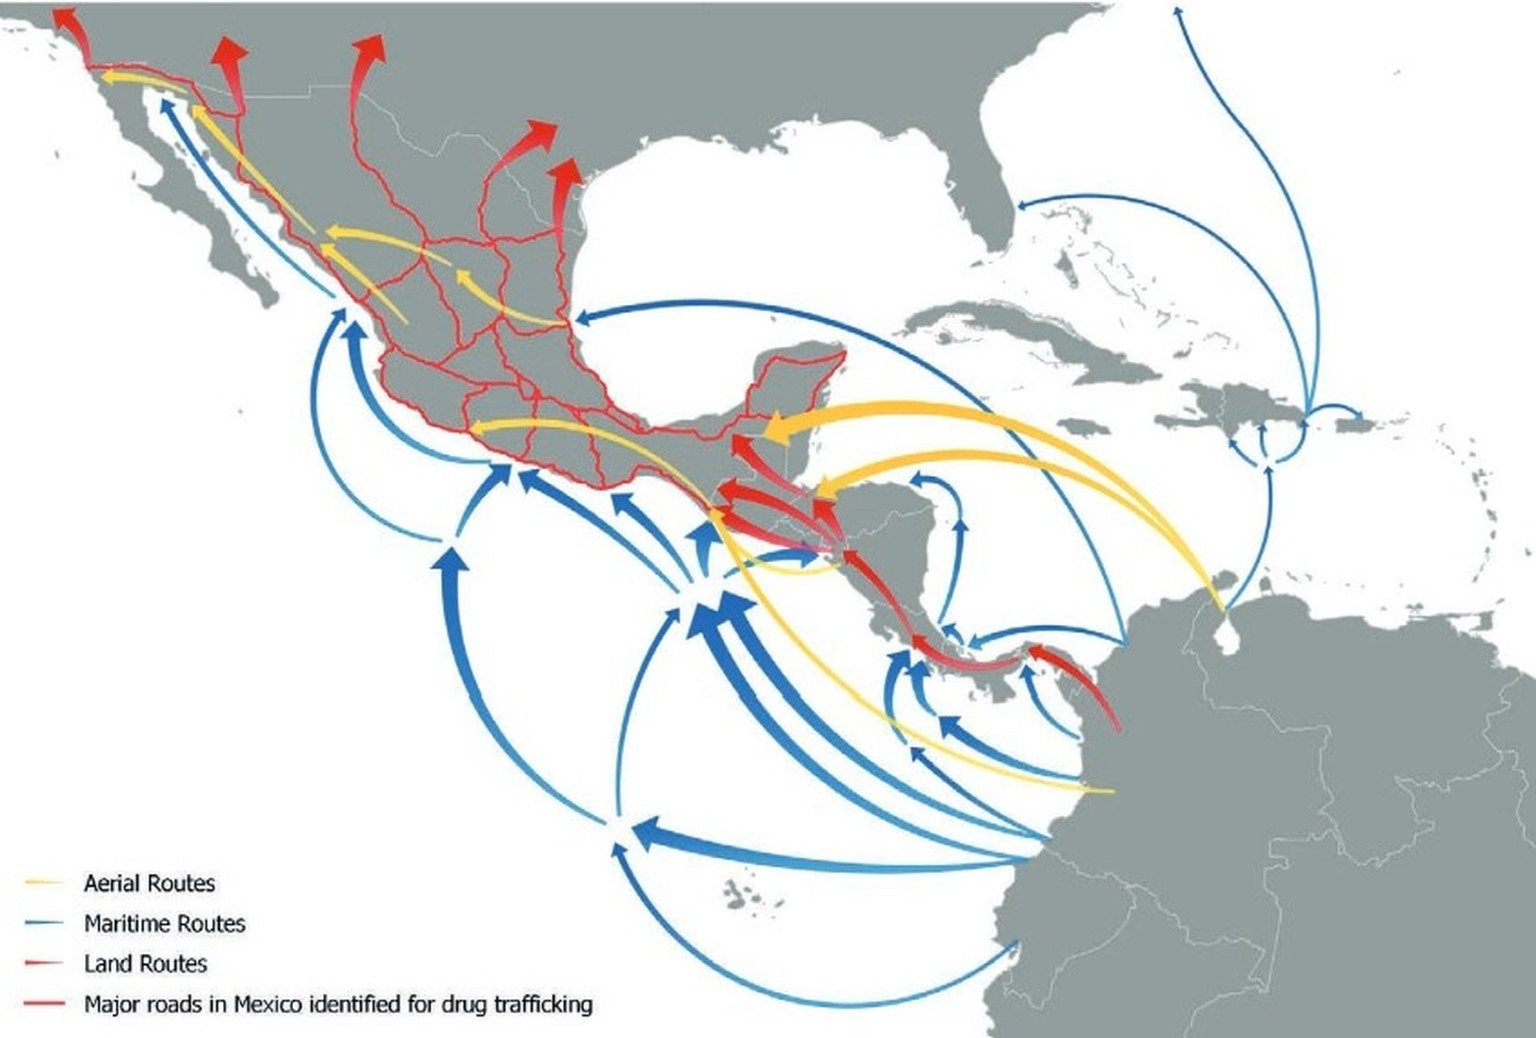 Cocaine trafficking routes from South America to North America, 2021
https://www.unodc.org/documents/data-and-analysis/cocaine/Global_cocaine_report_2023.pdf